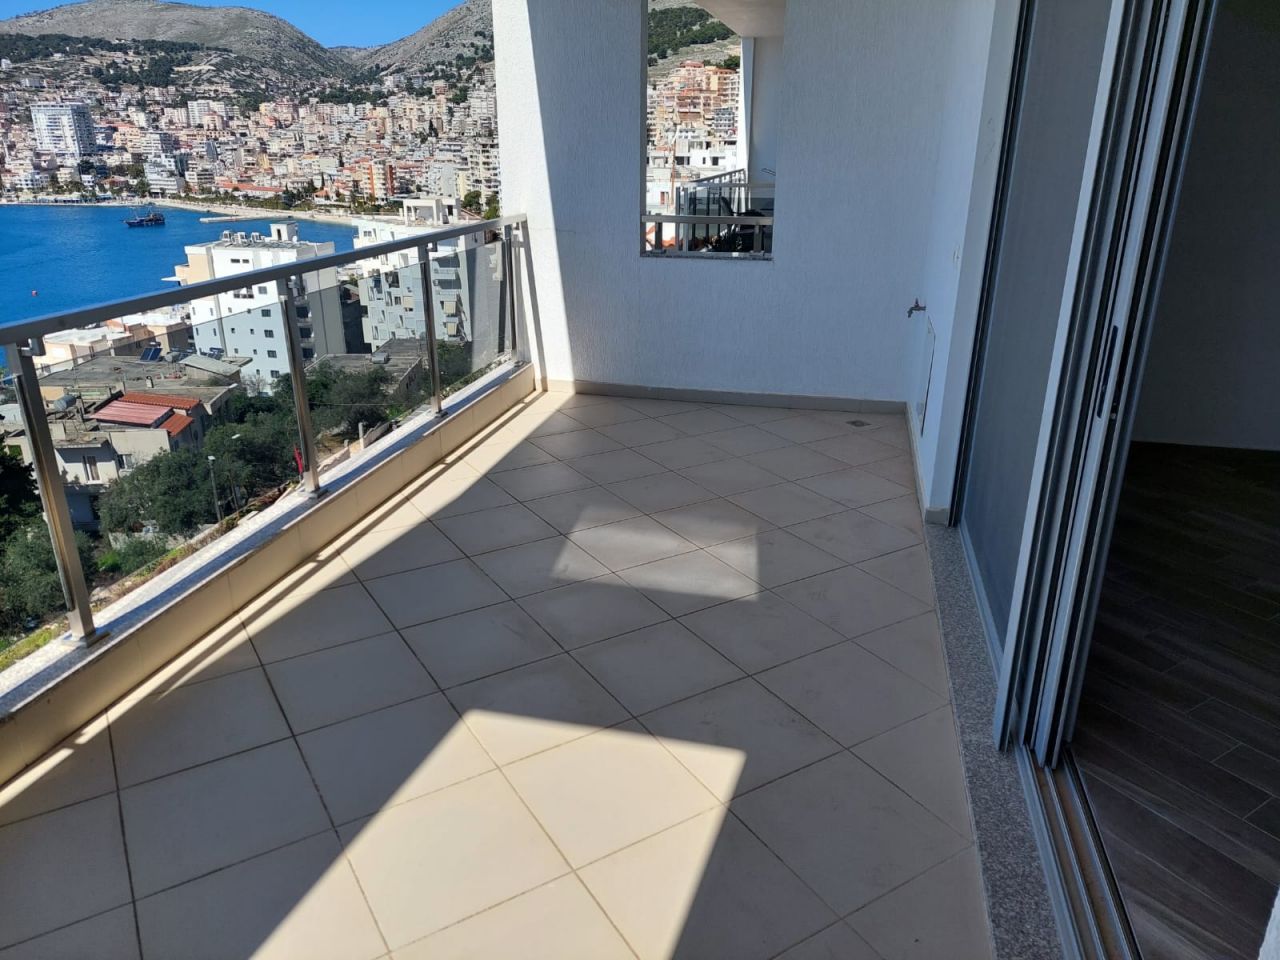 Apartment for sale in Saranda, with beautiful view at Ionian Sea. 